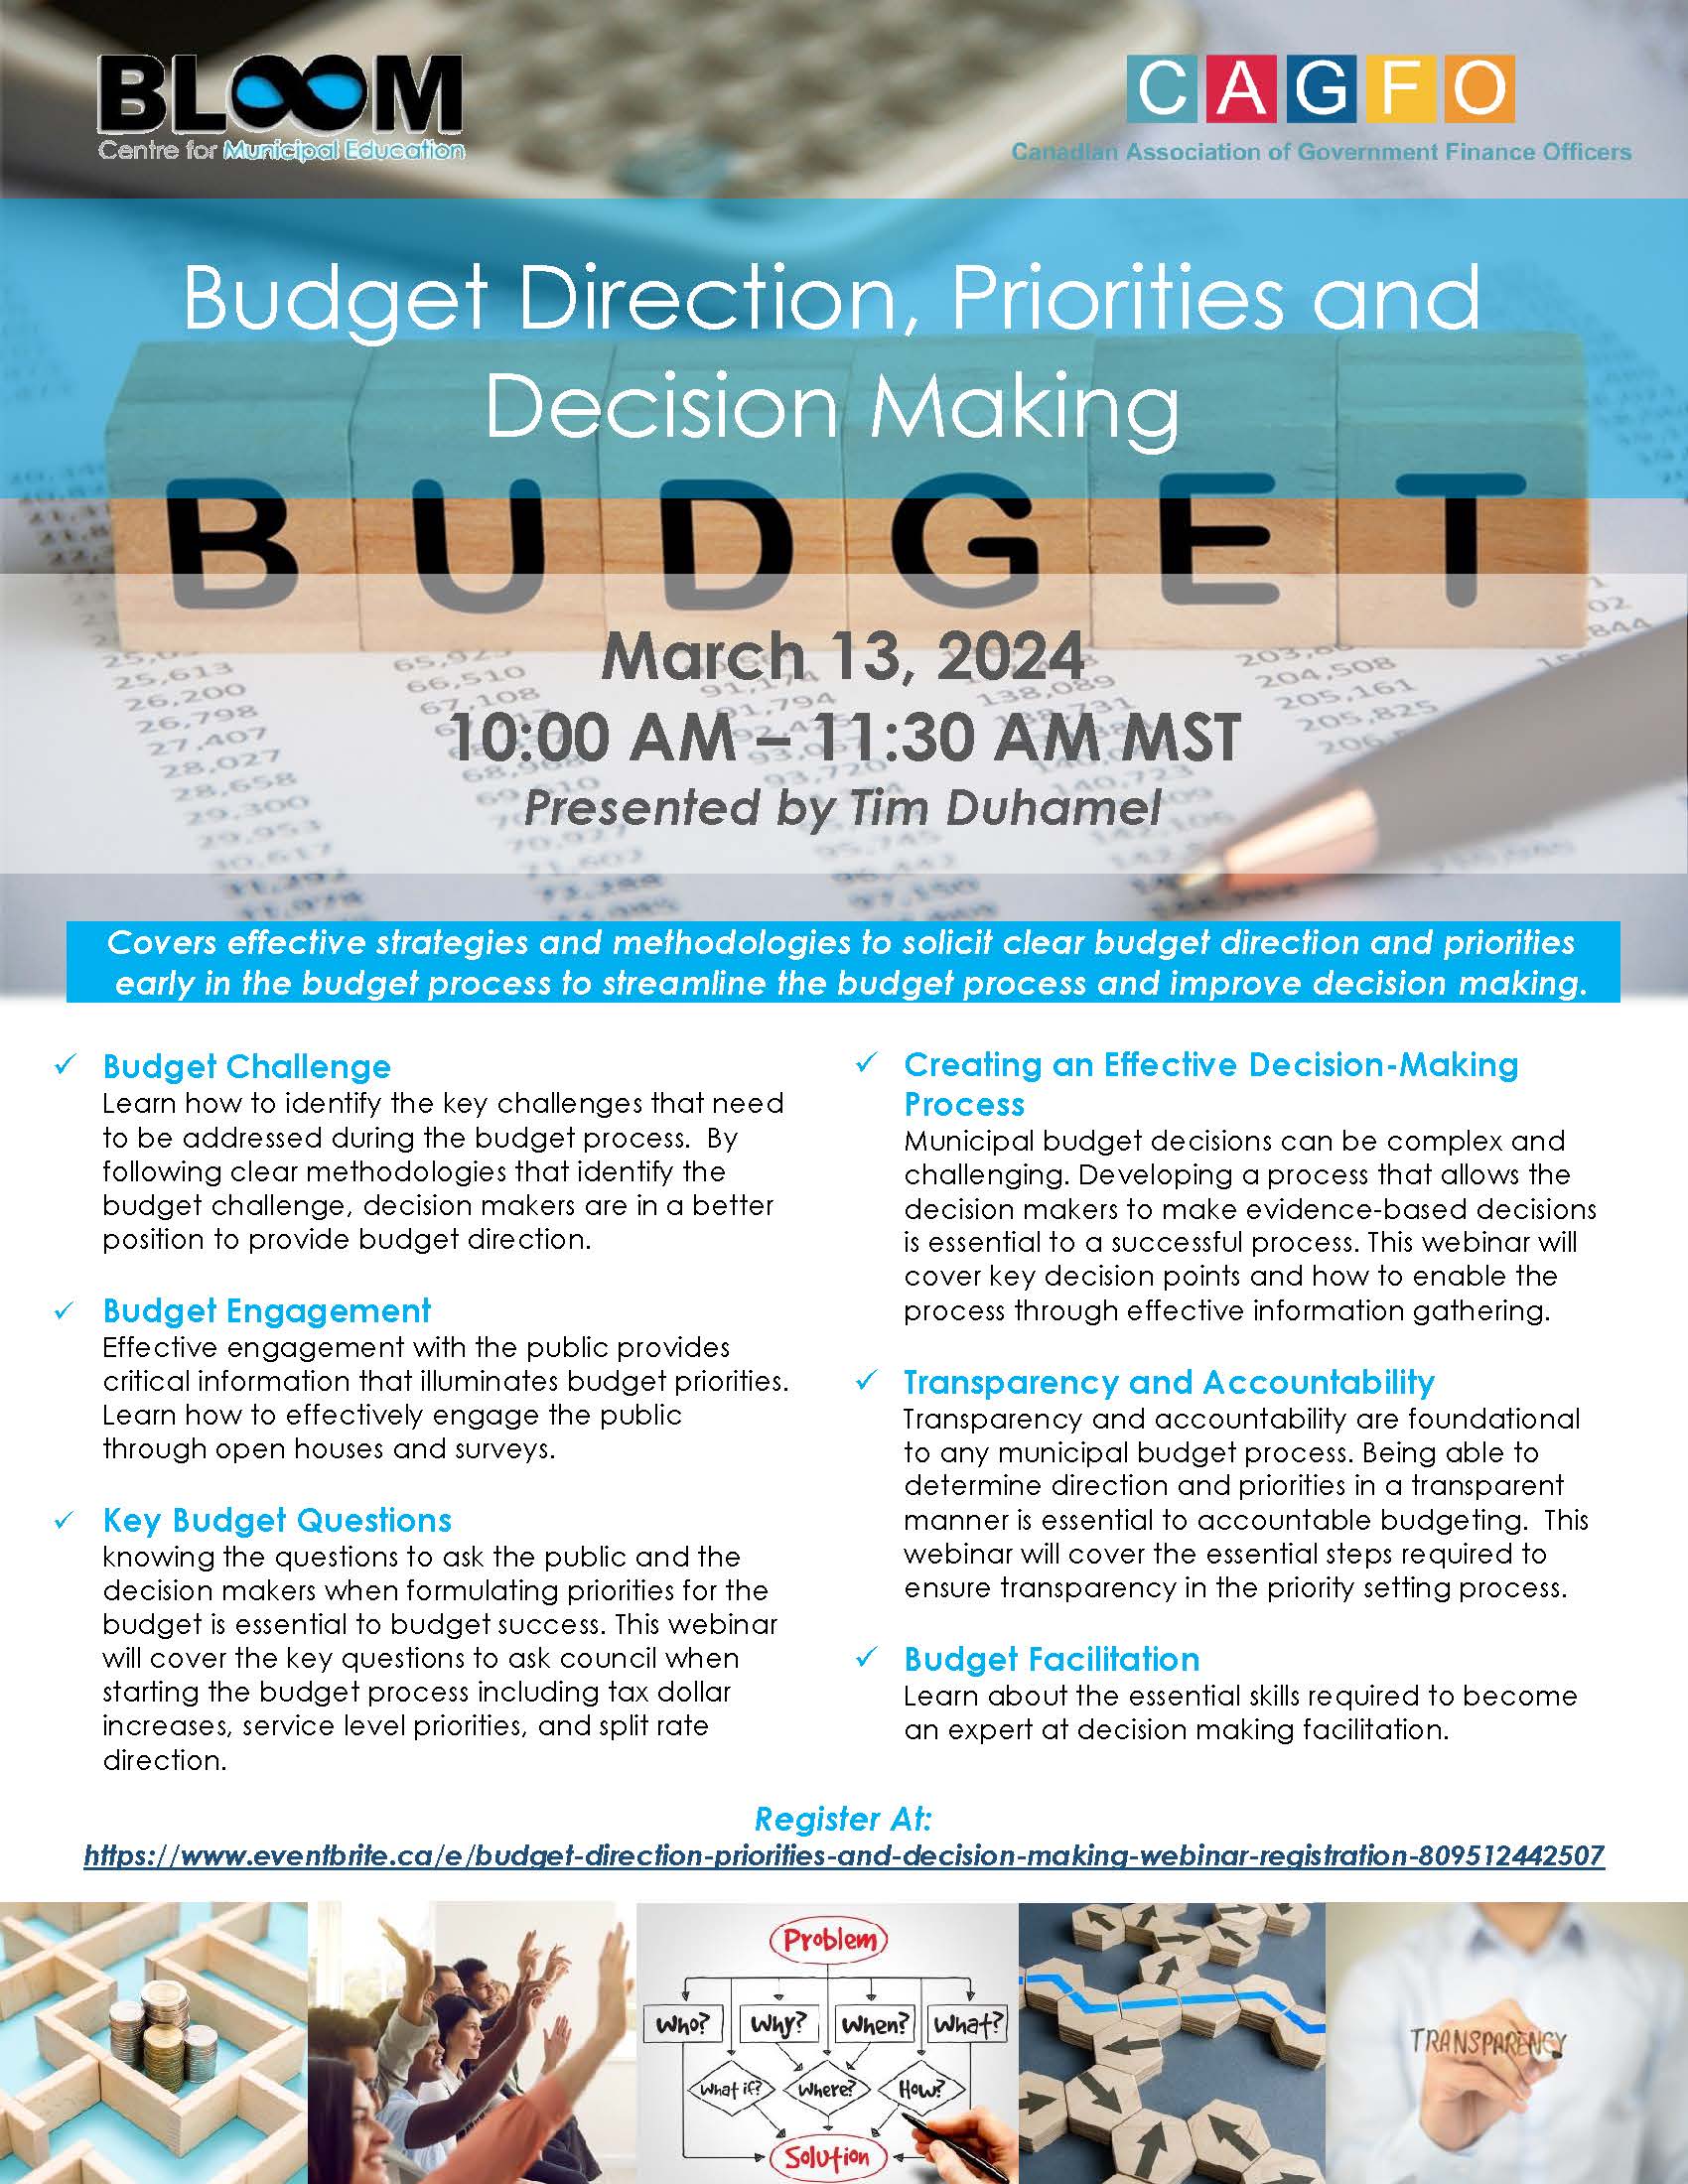 BLOOM WEBINAR - Budget Direction Priorities and Decision Making - March 13 2024 partner CAGFO<br />
